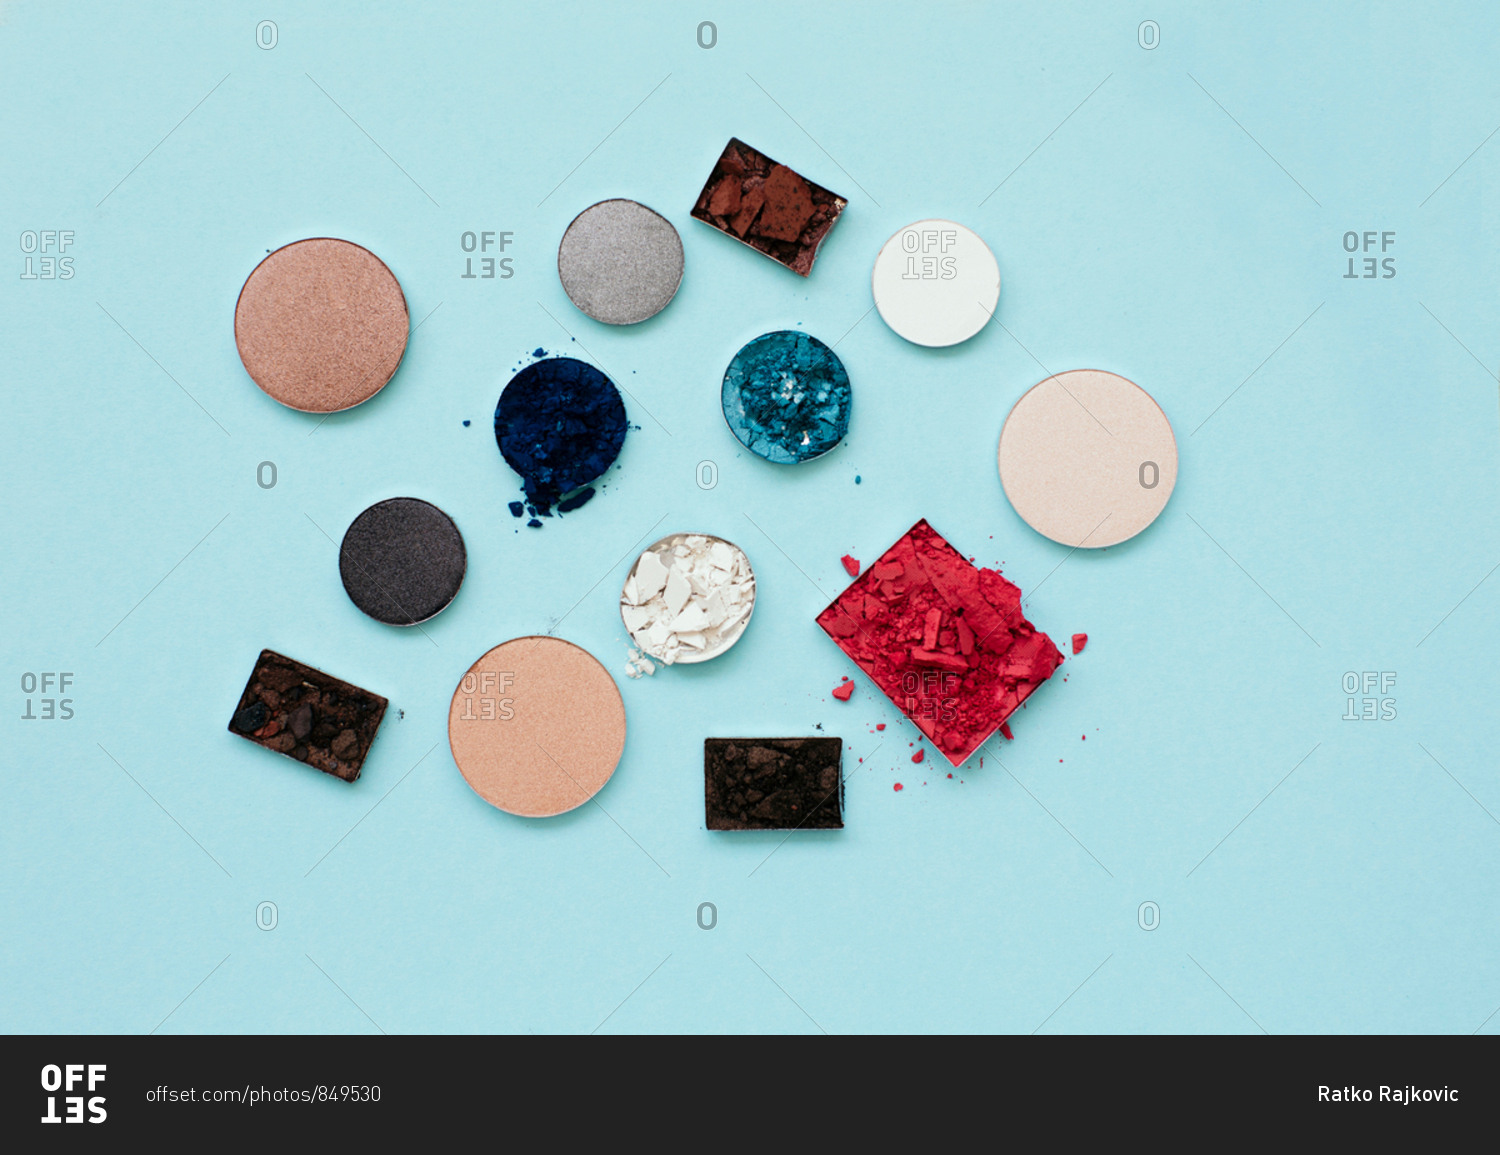 Flatlay of pressed powder makeup on a pale blue background